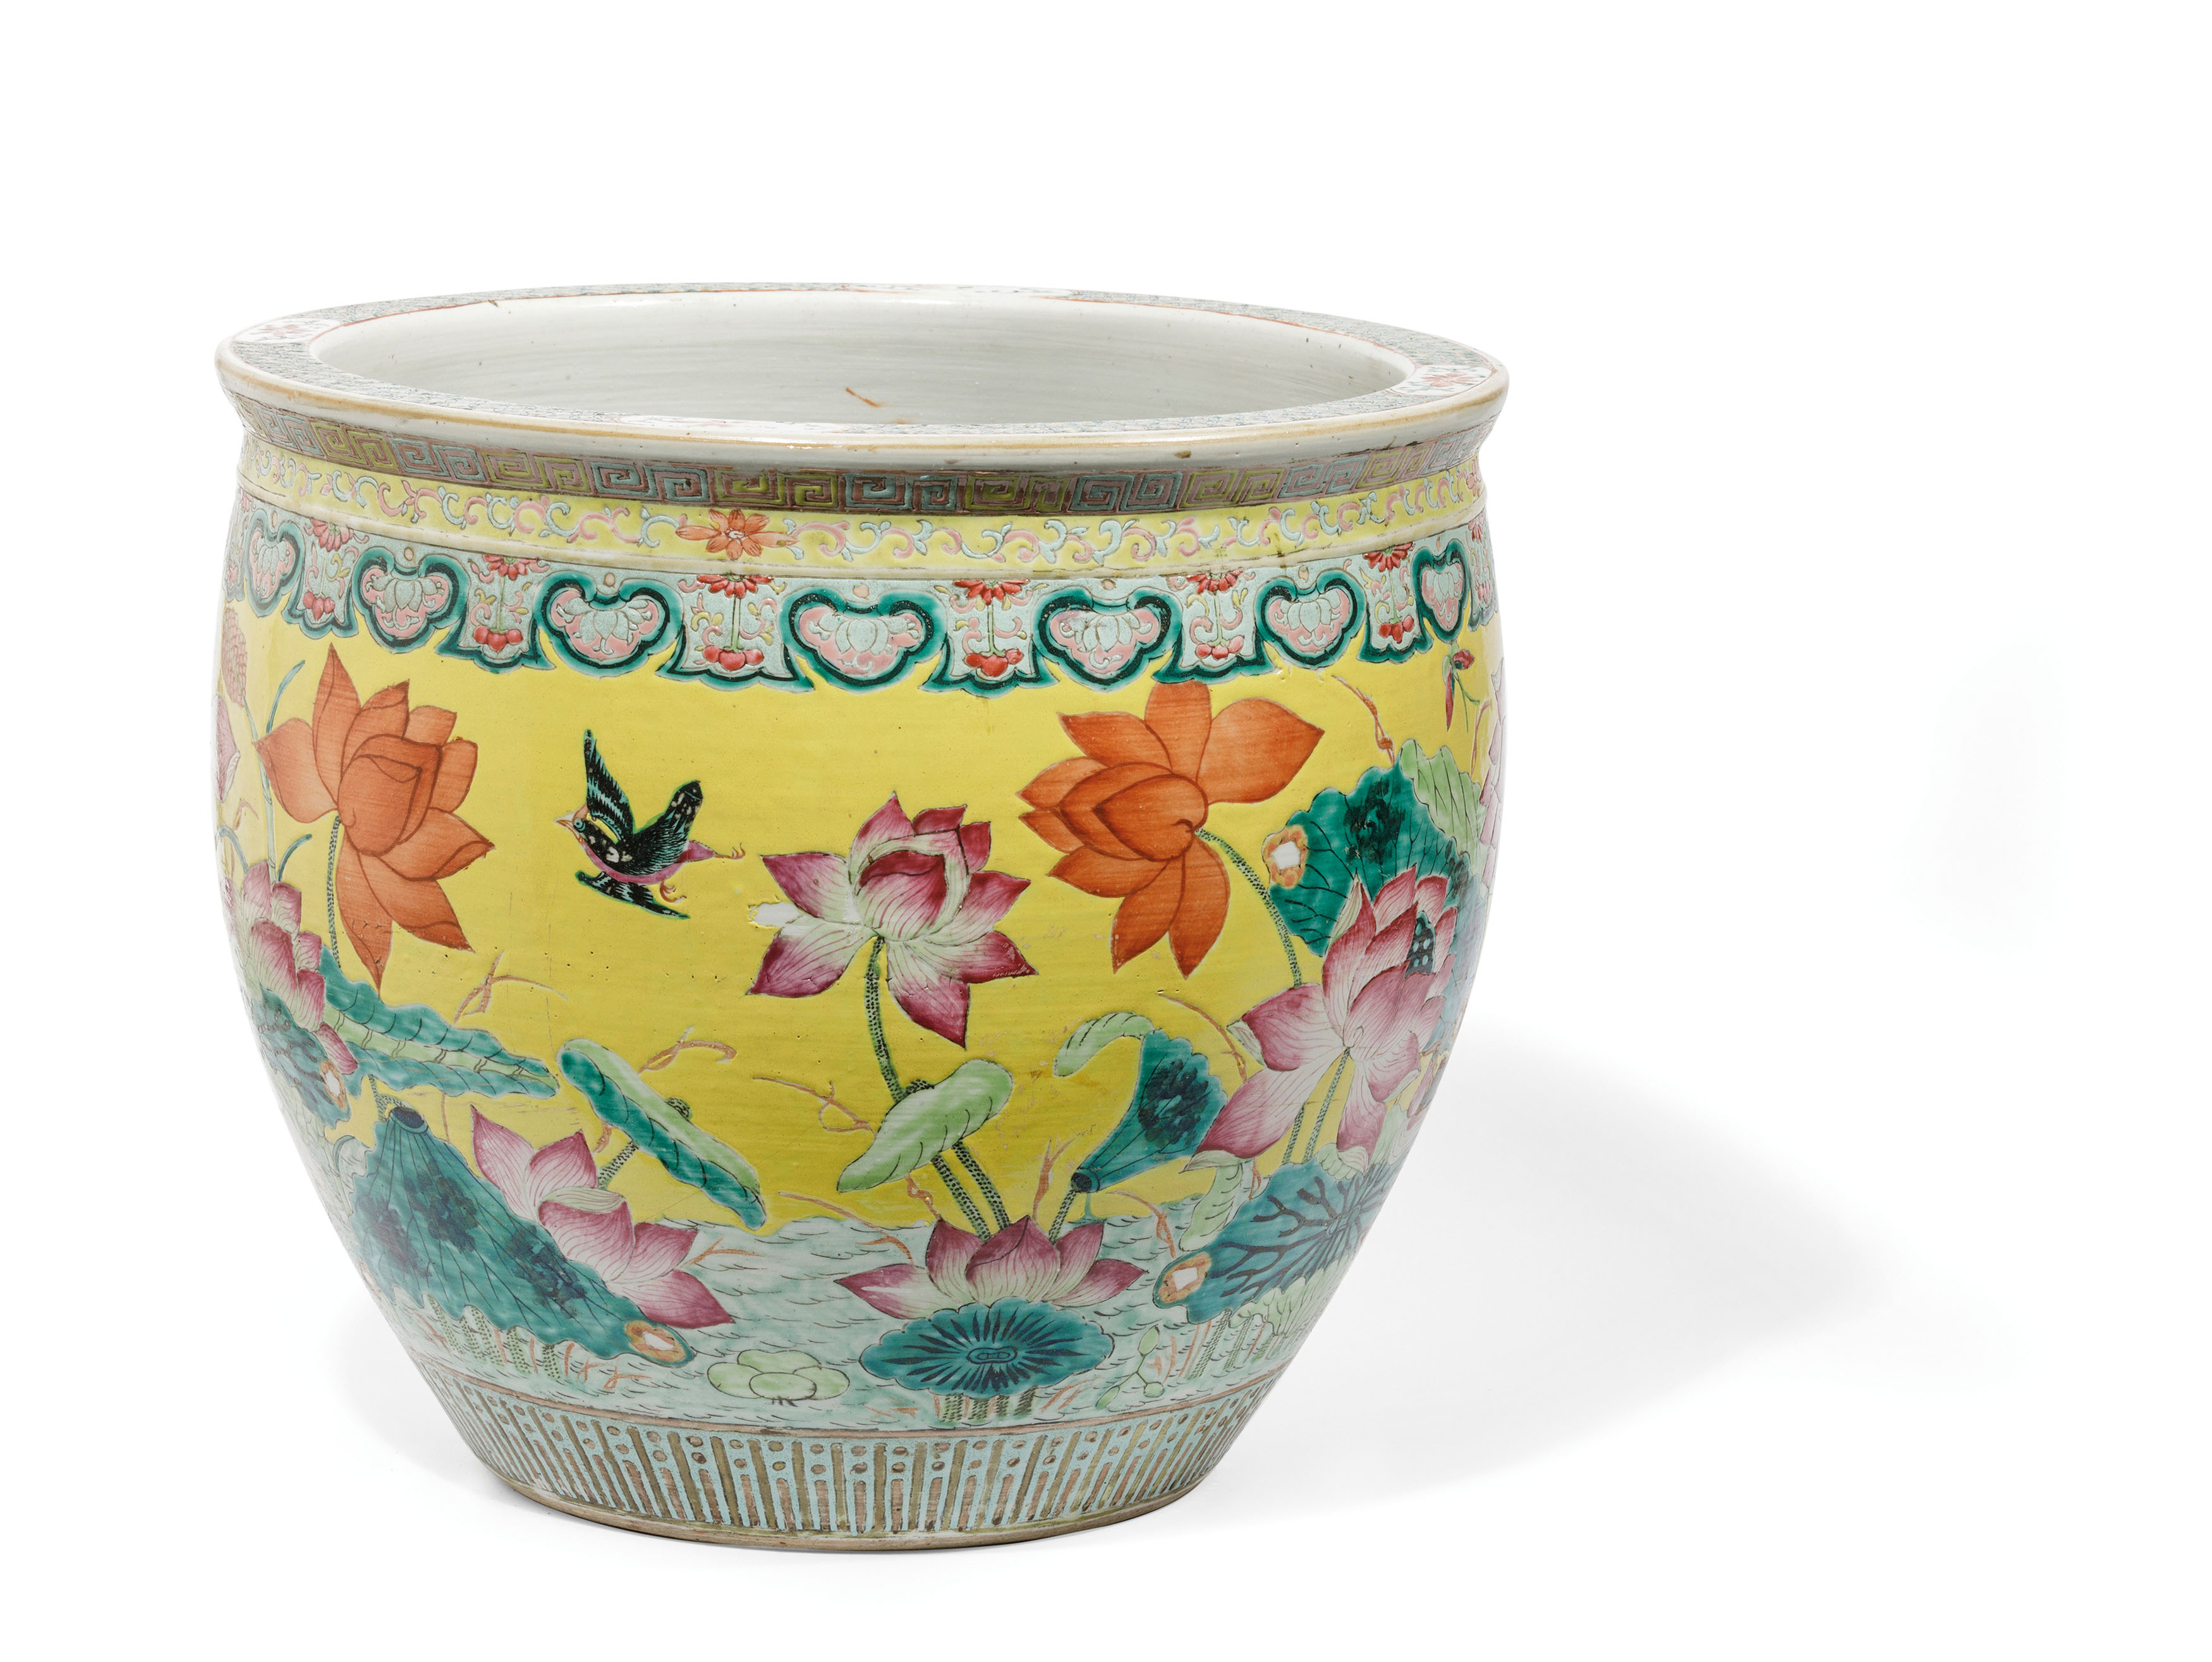 A LARGE FAMILLE ROSE PORCELAIN YELLOW GROUND FISH BOWL, CHINA, 19TH -20TH CENTURY - Image 3 of 4